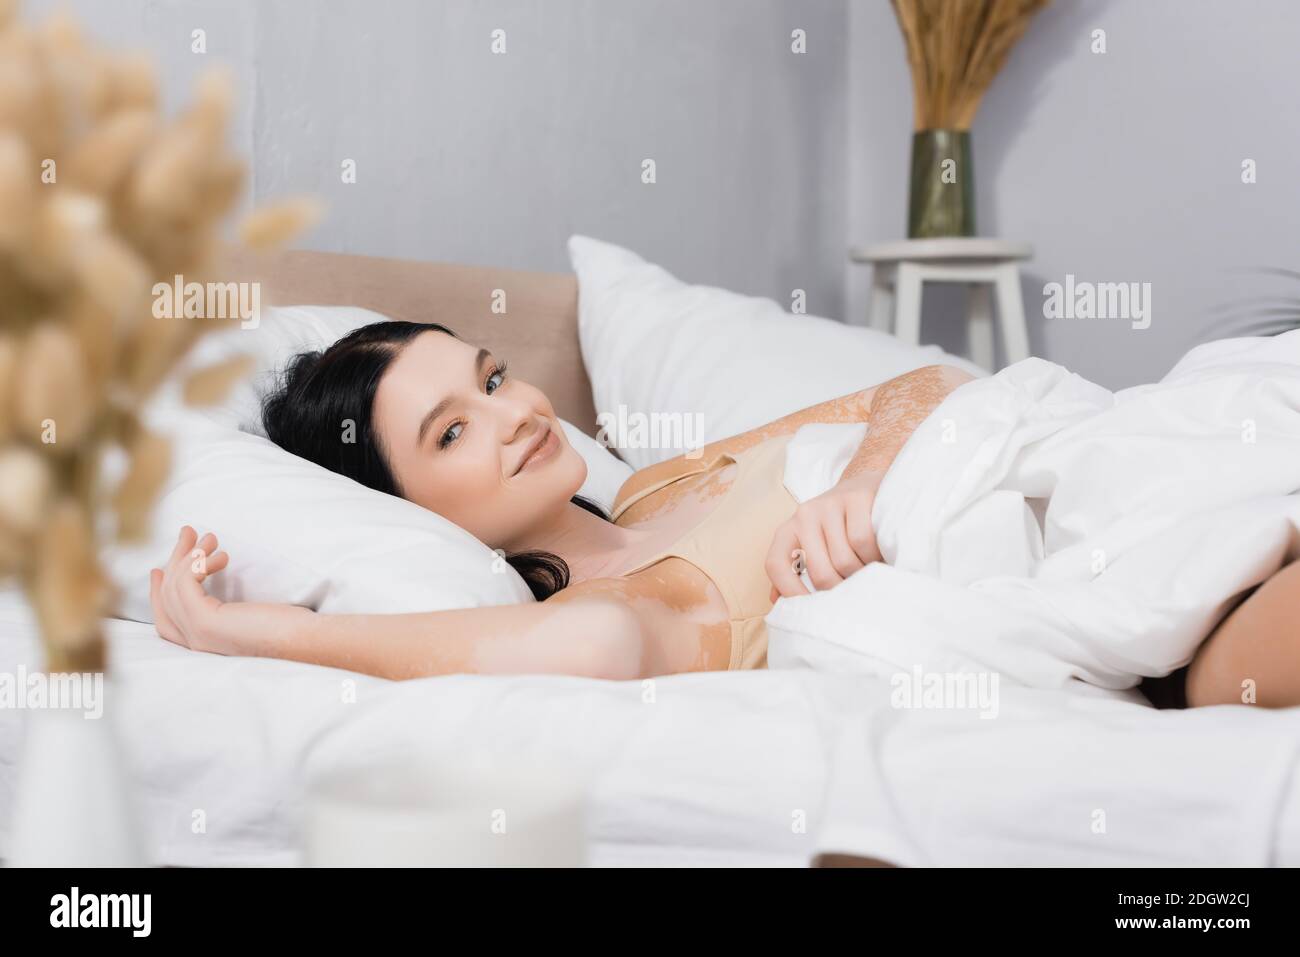 https://c8.alamy.com/comp/2DGW2CJ/young-happy-woman-with-vitiligo-lying-on-bed-with-blurred-foreground-2DGW2CJ.jpg